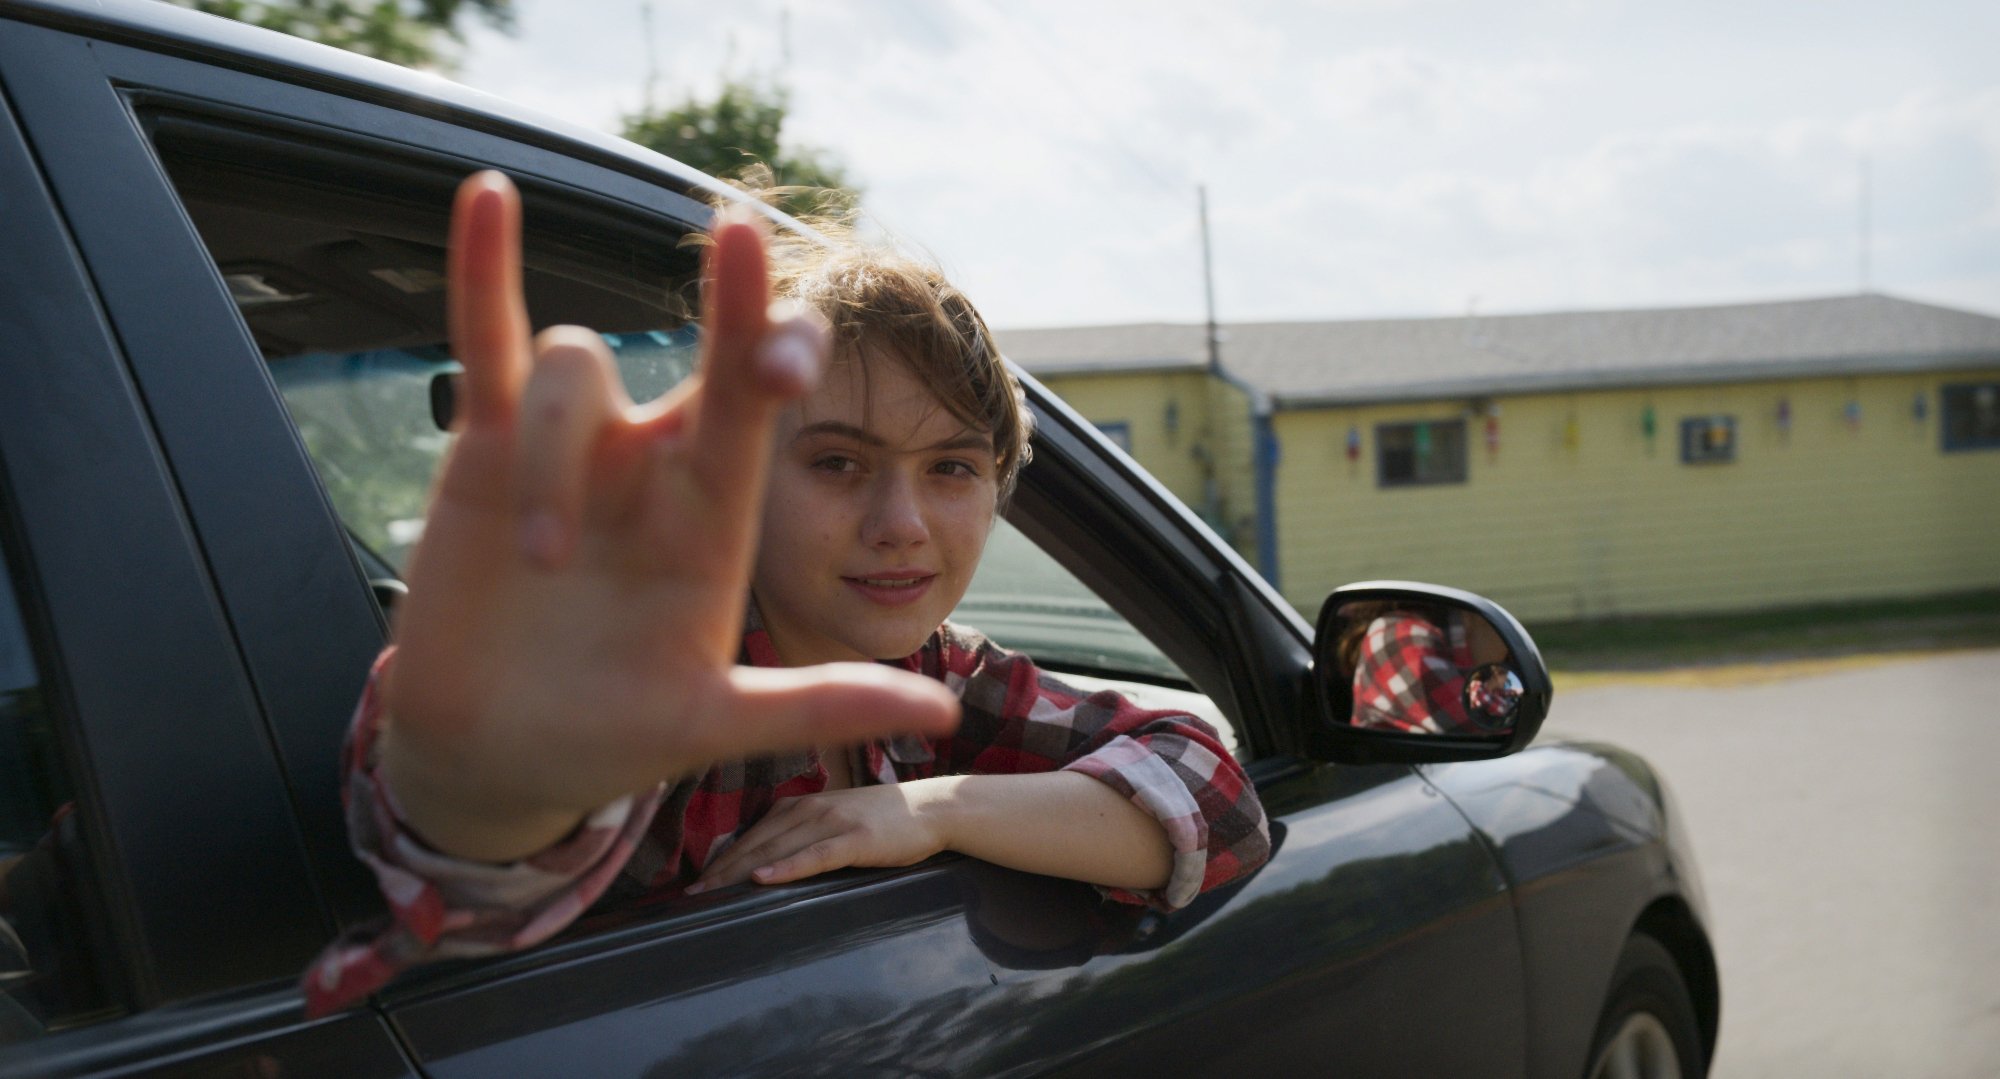 'CODA' Emilia Jones as Ruby signing out of the window of a moving car